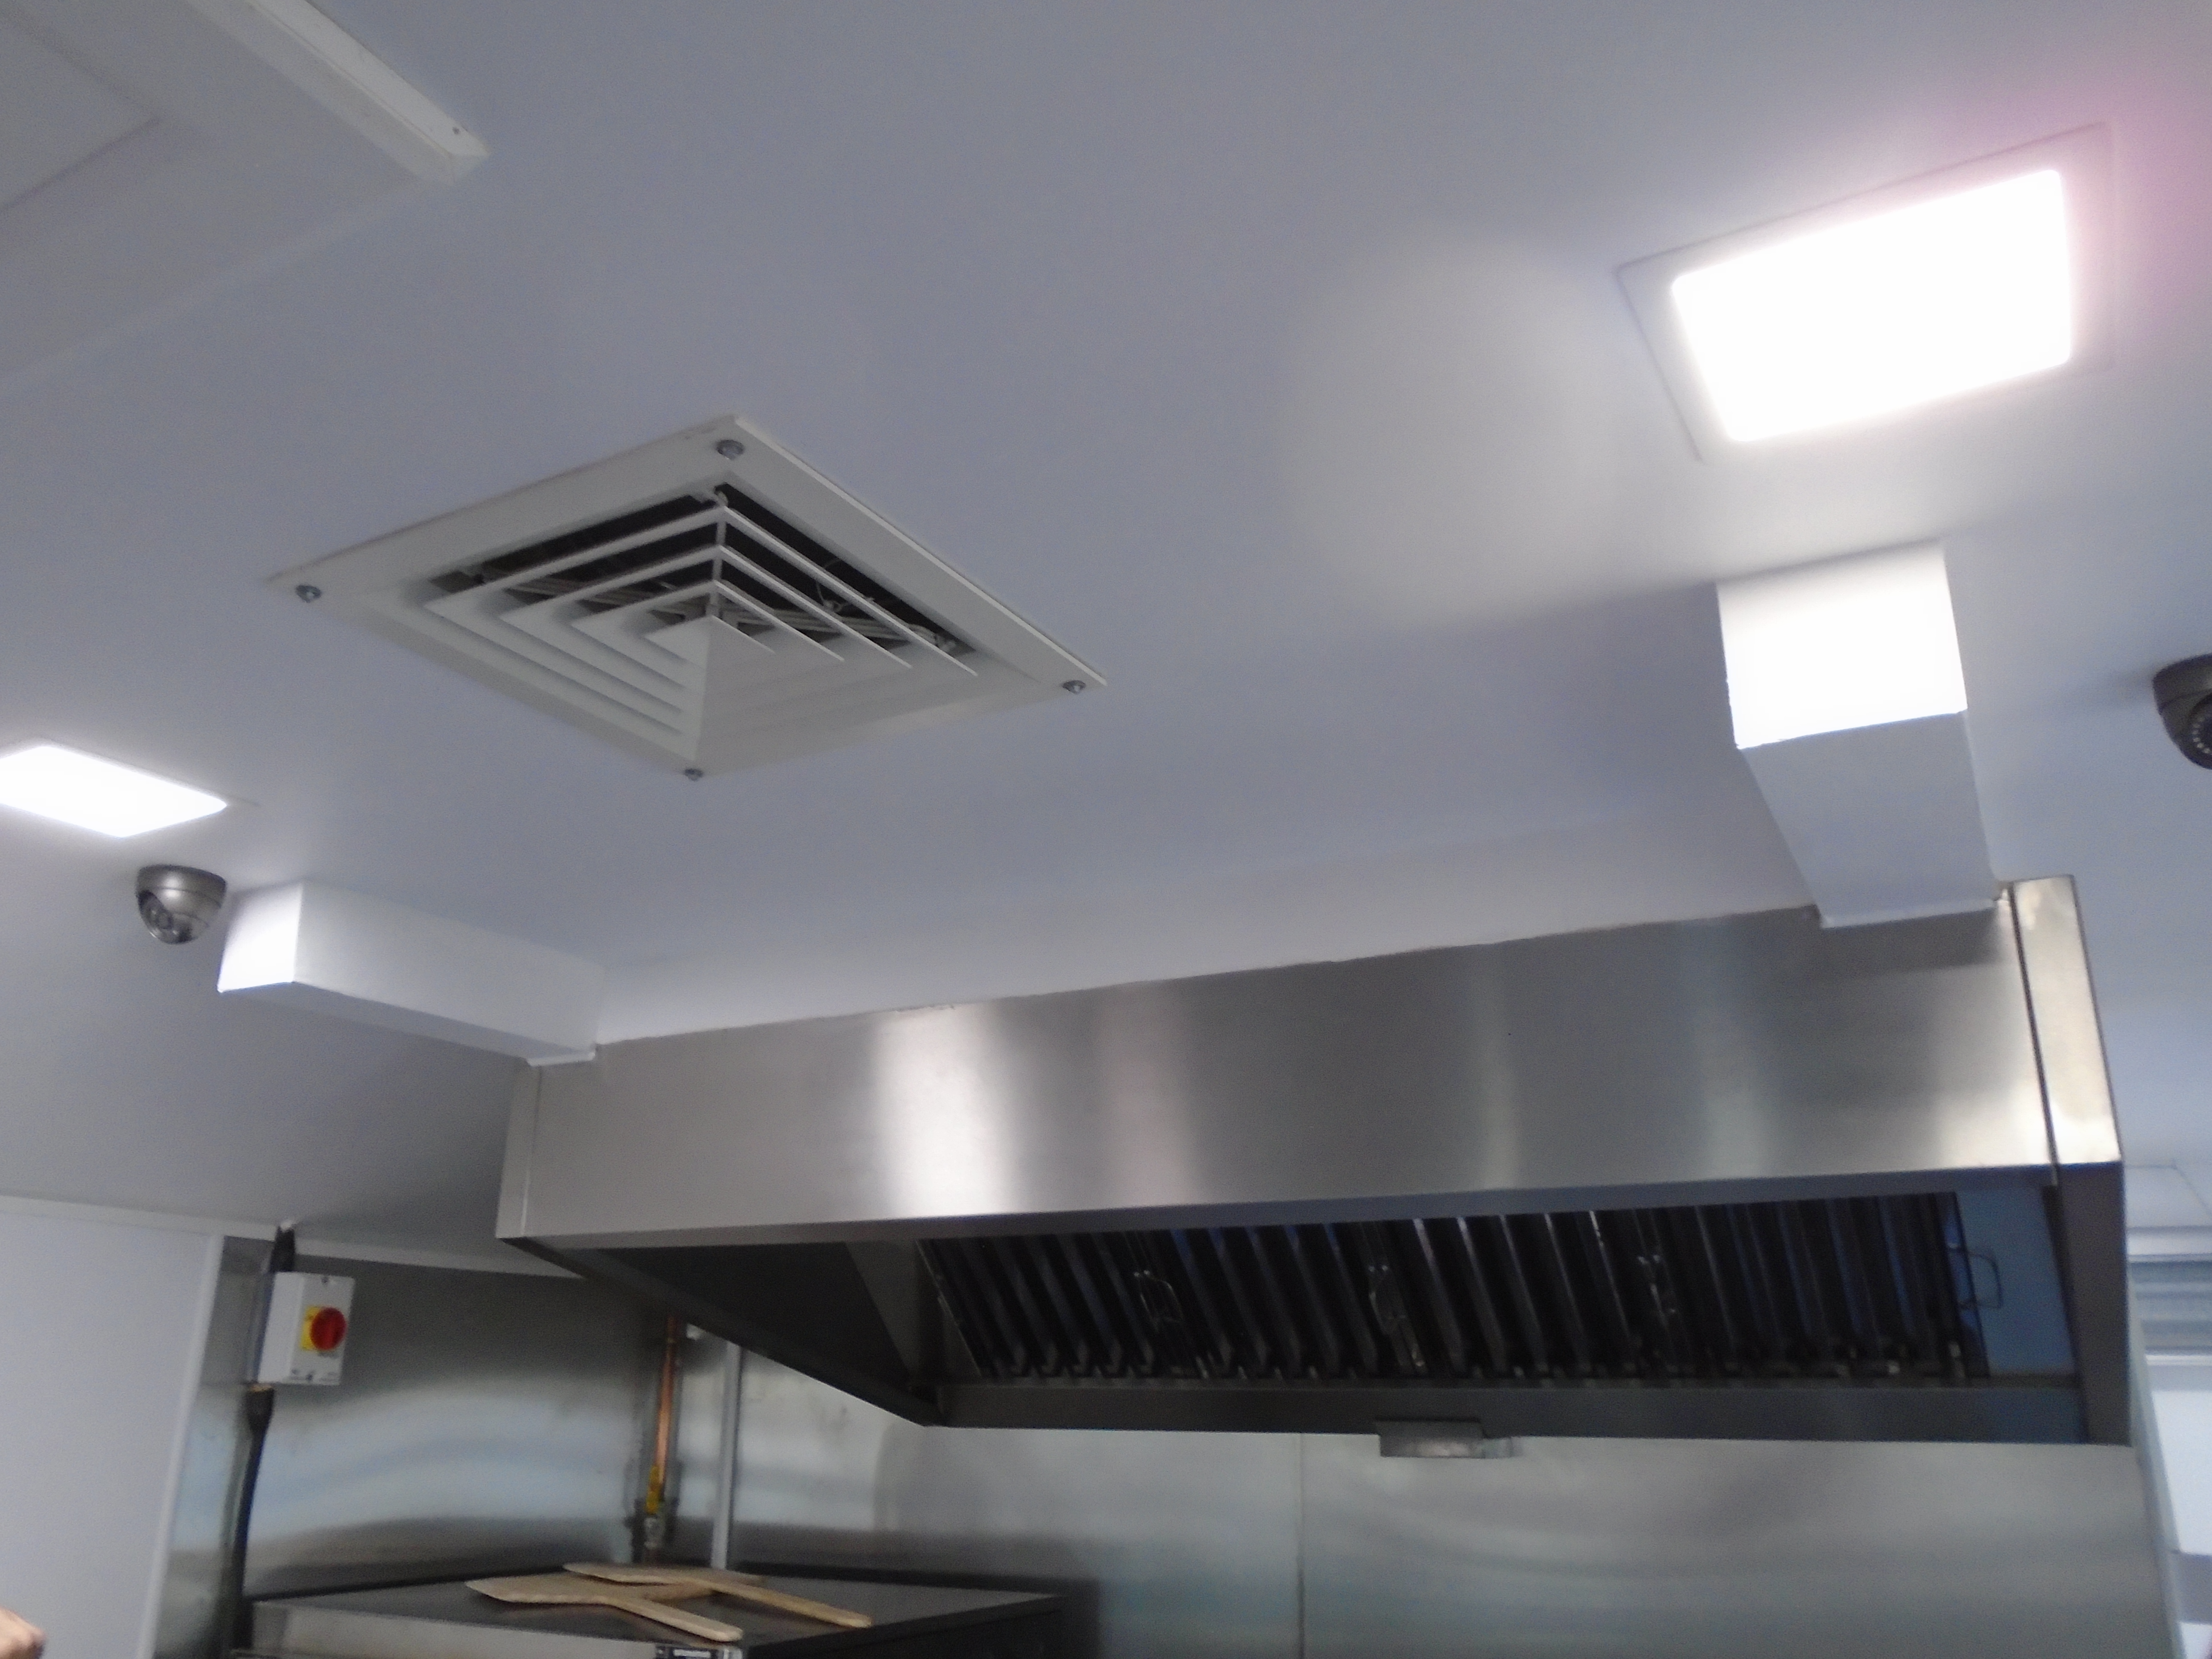 Commercial Flues and Extraction Systems